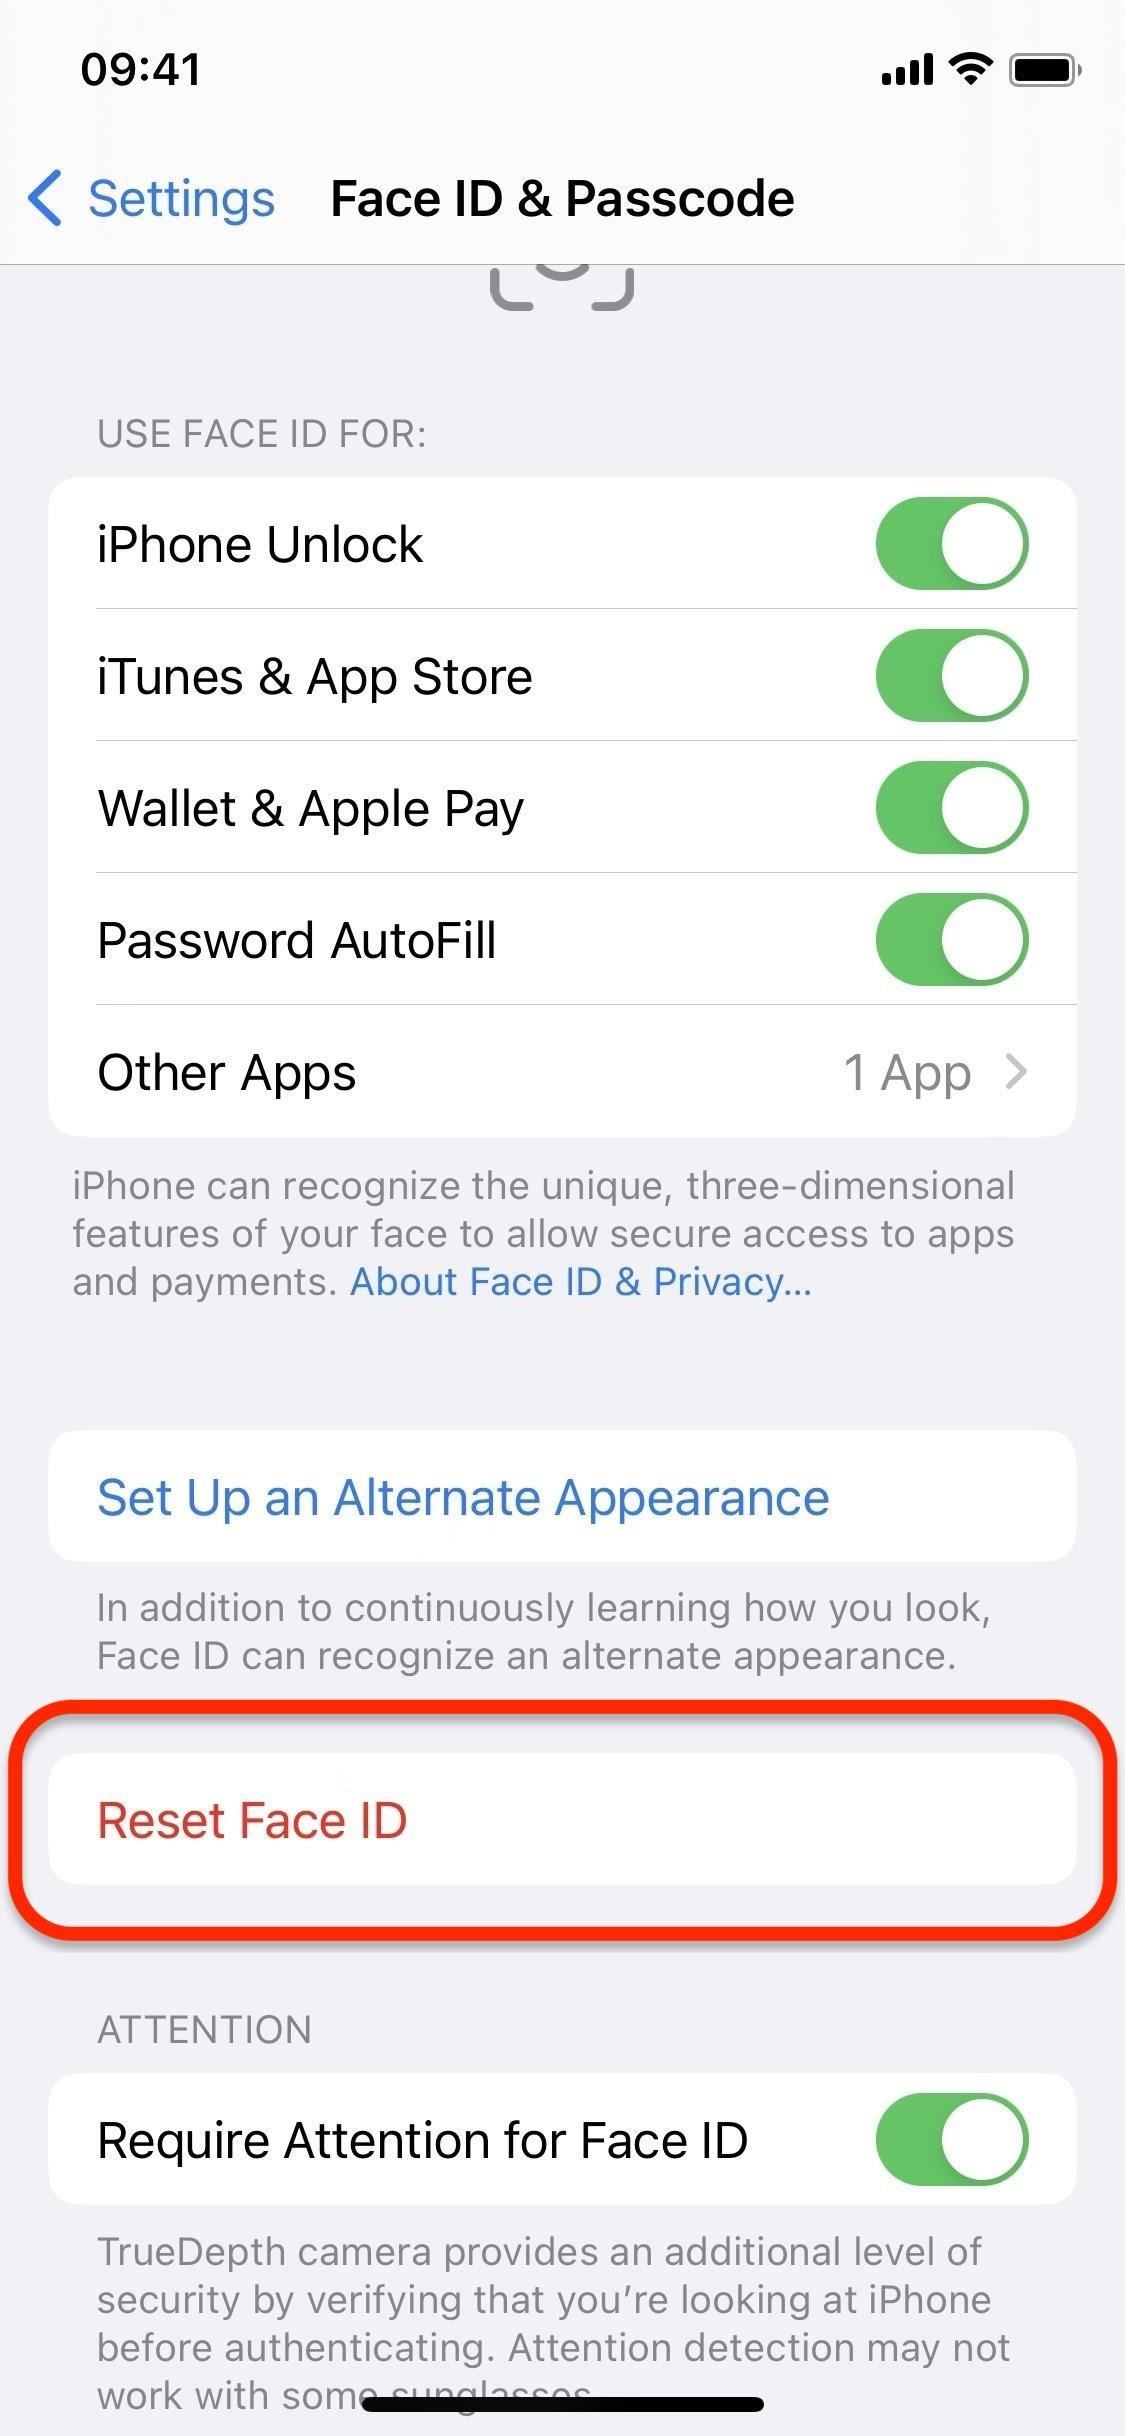 Can't Use Face ID in Landscape Orientation on Your iPhone? Use These 13 Tips to Get It Working Smoothly